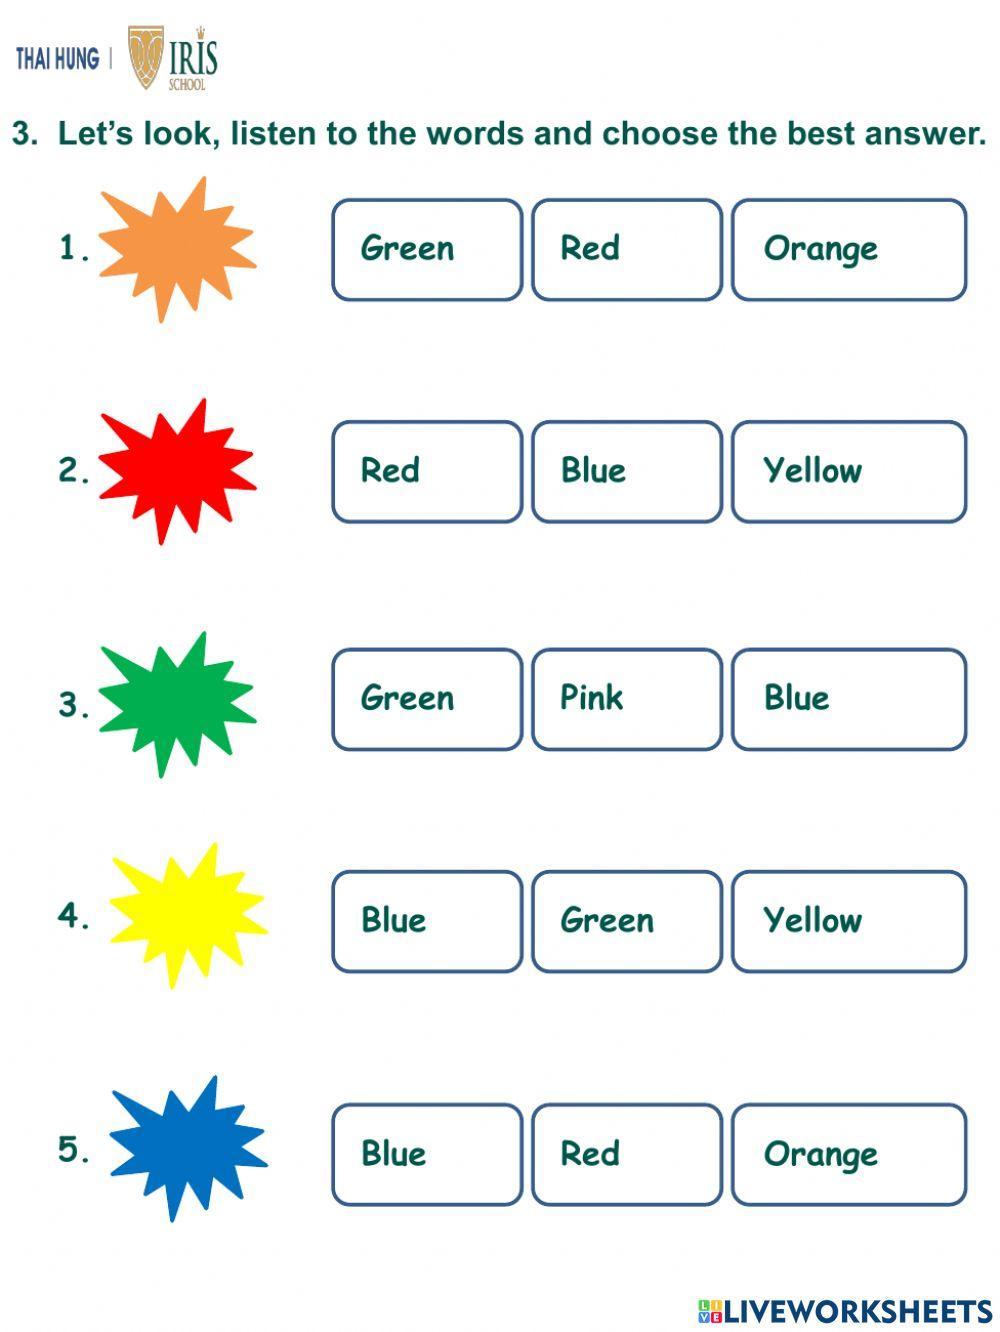 Worksheet about Colors for Kids